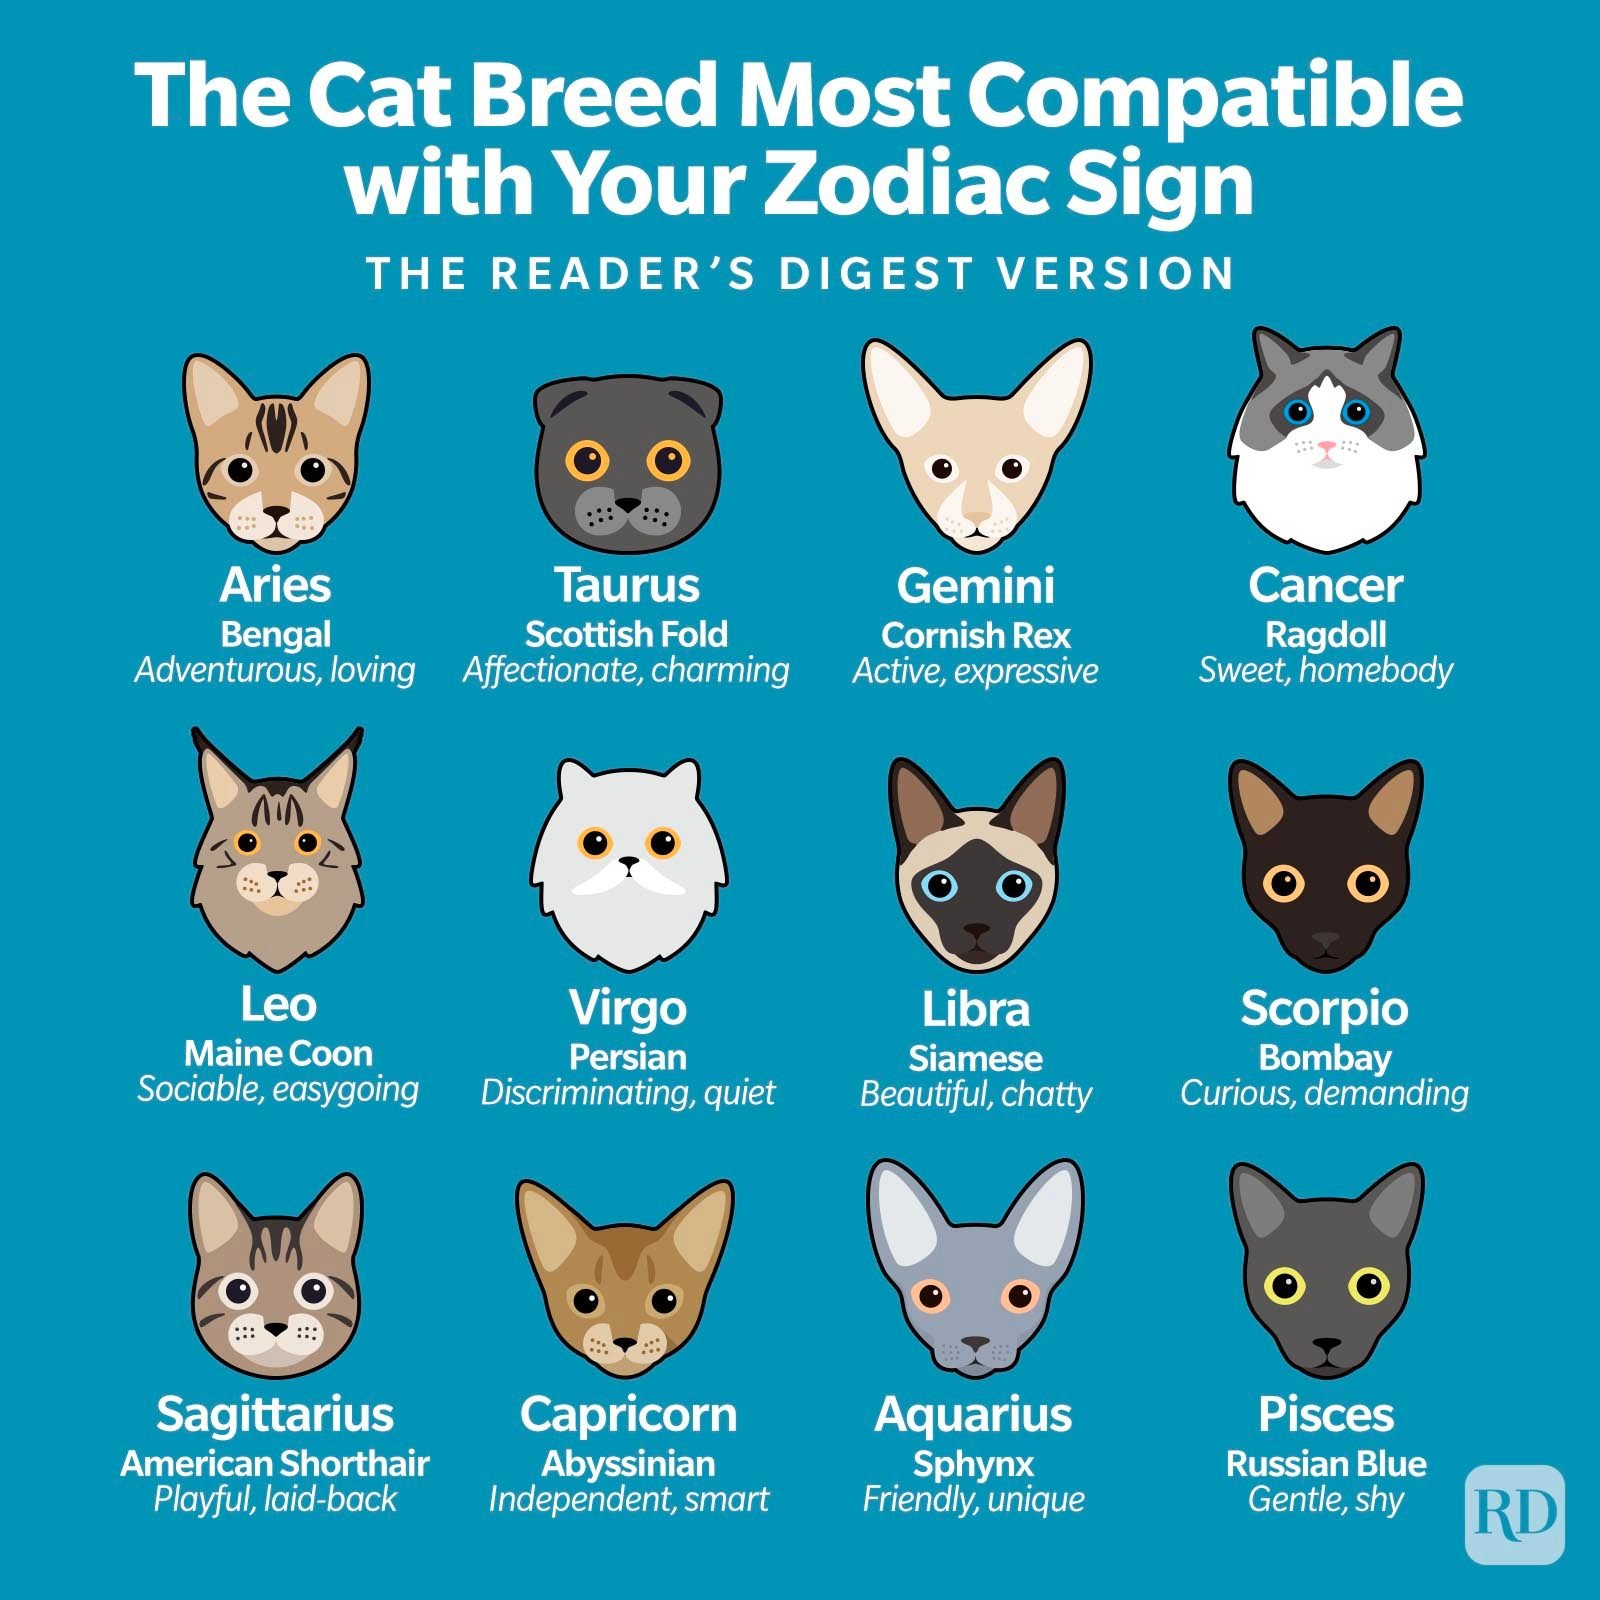 The Cat Breed Most Compatible With Your Zodiac Sign Infographic